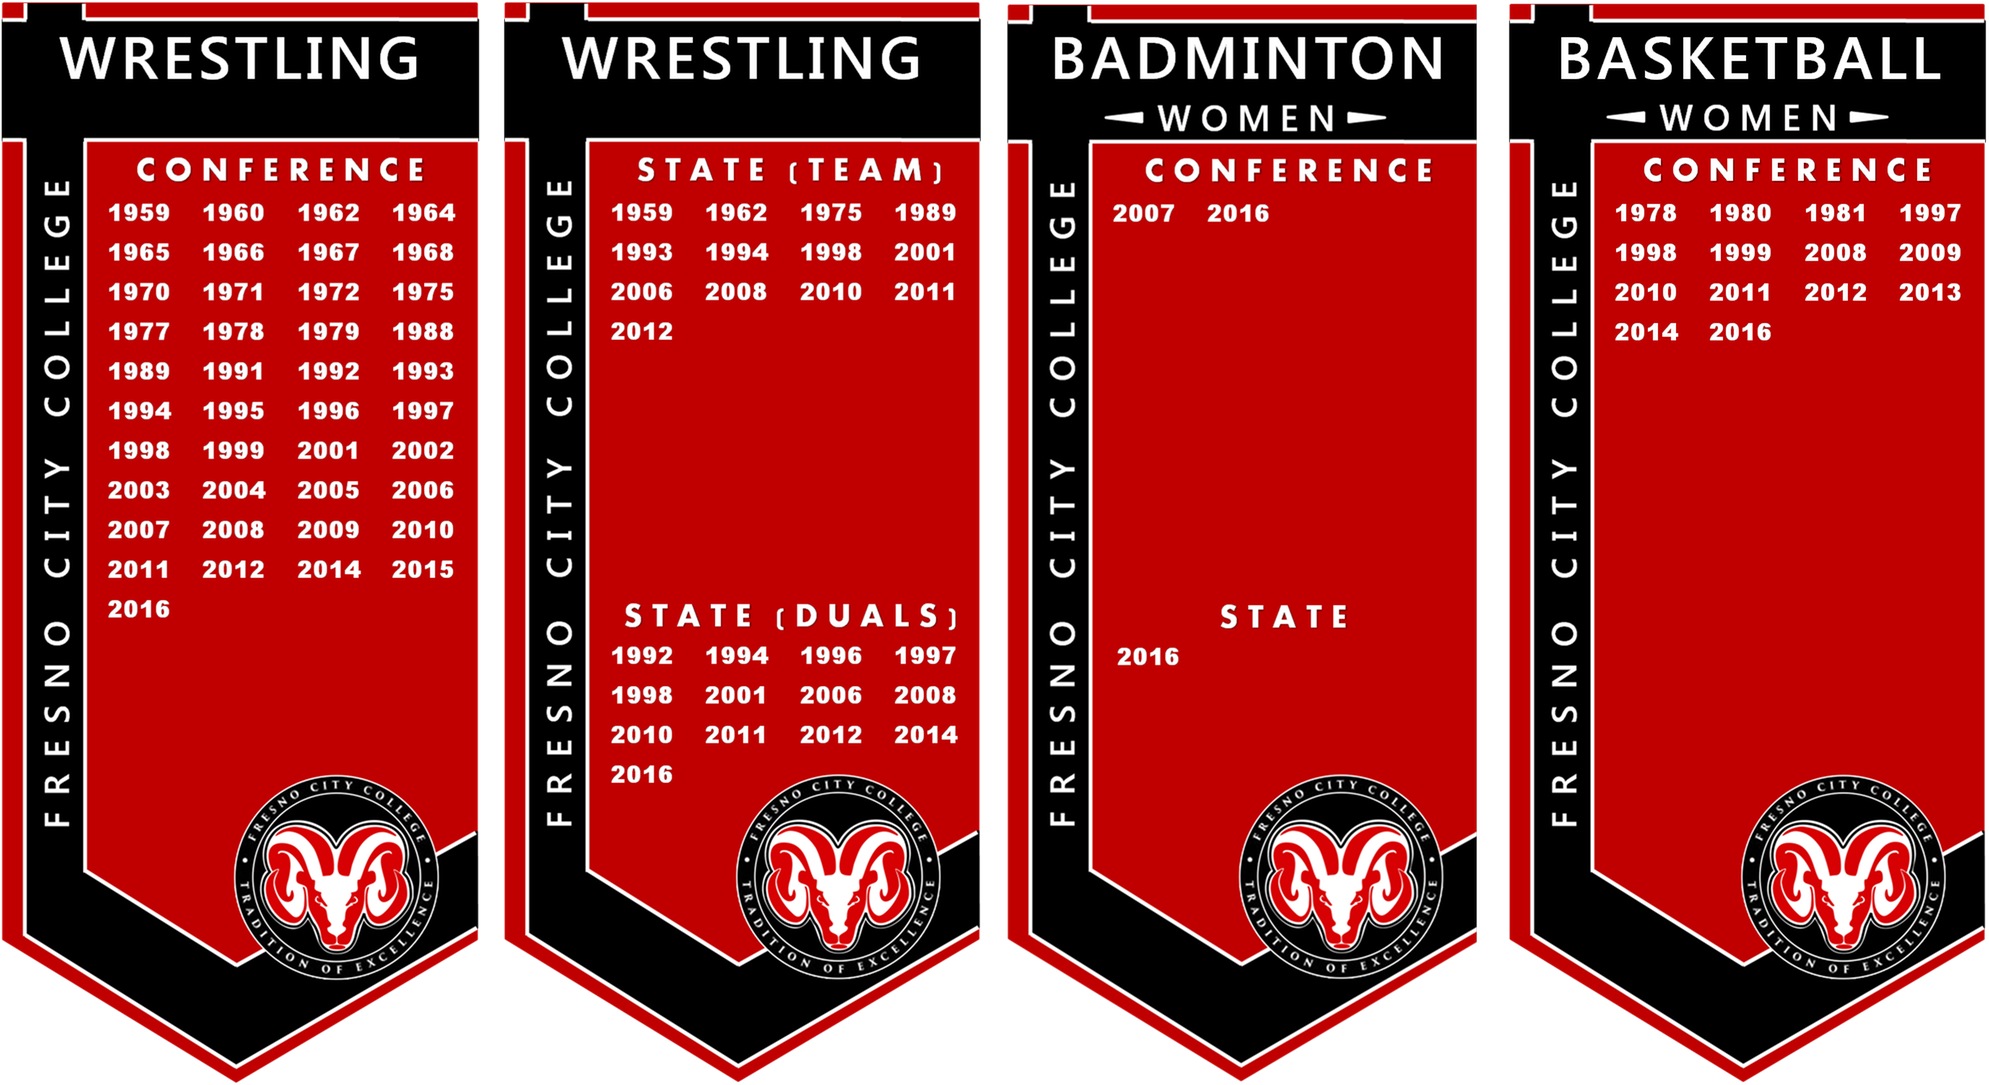 lists of Conference and Championship years for FCC's Wrestling, Women's Badminton, and Women's Basketball teams.